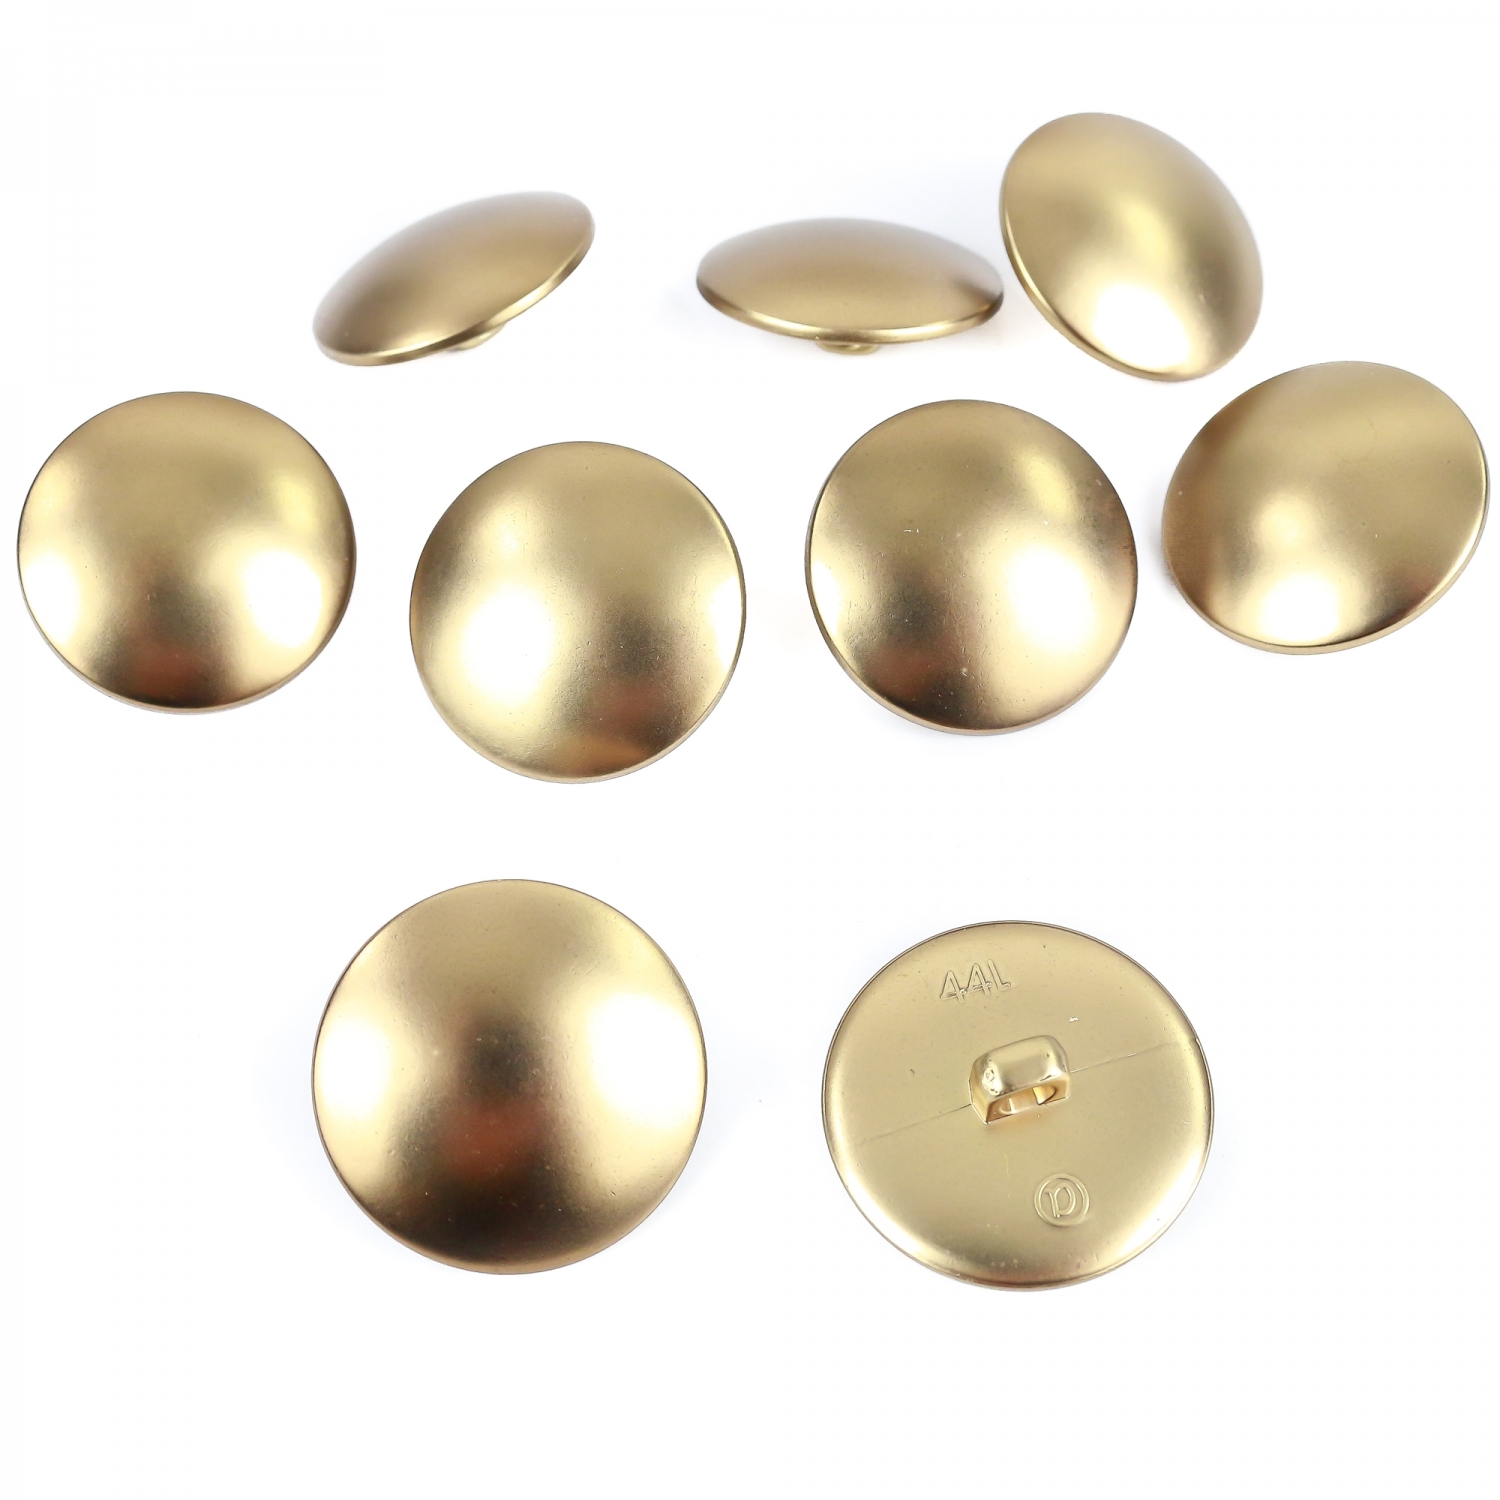 Plastic Metallized Shank Buttons, size 24 (100 pcs/pack) Code: S149